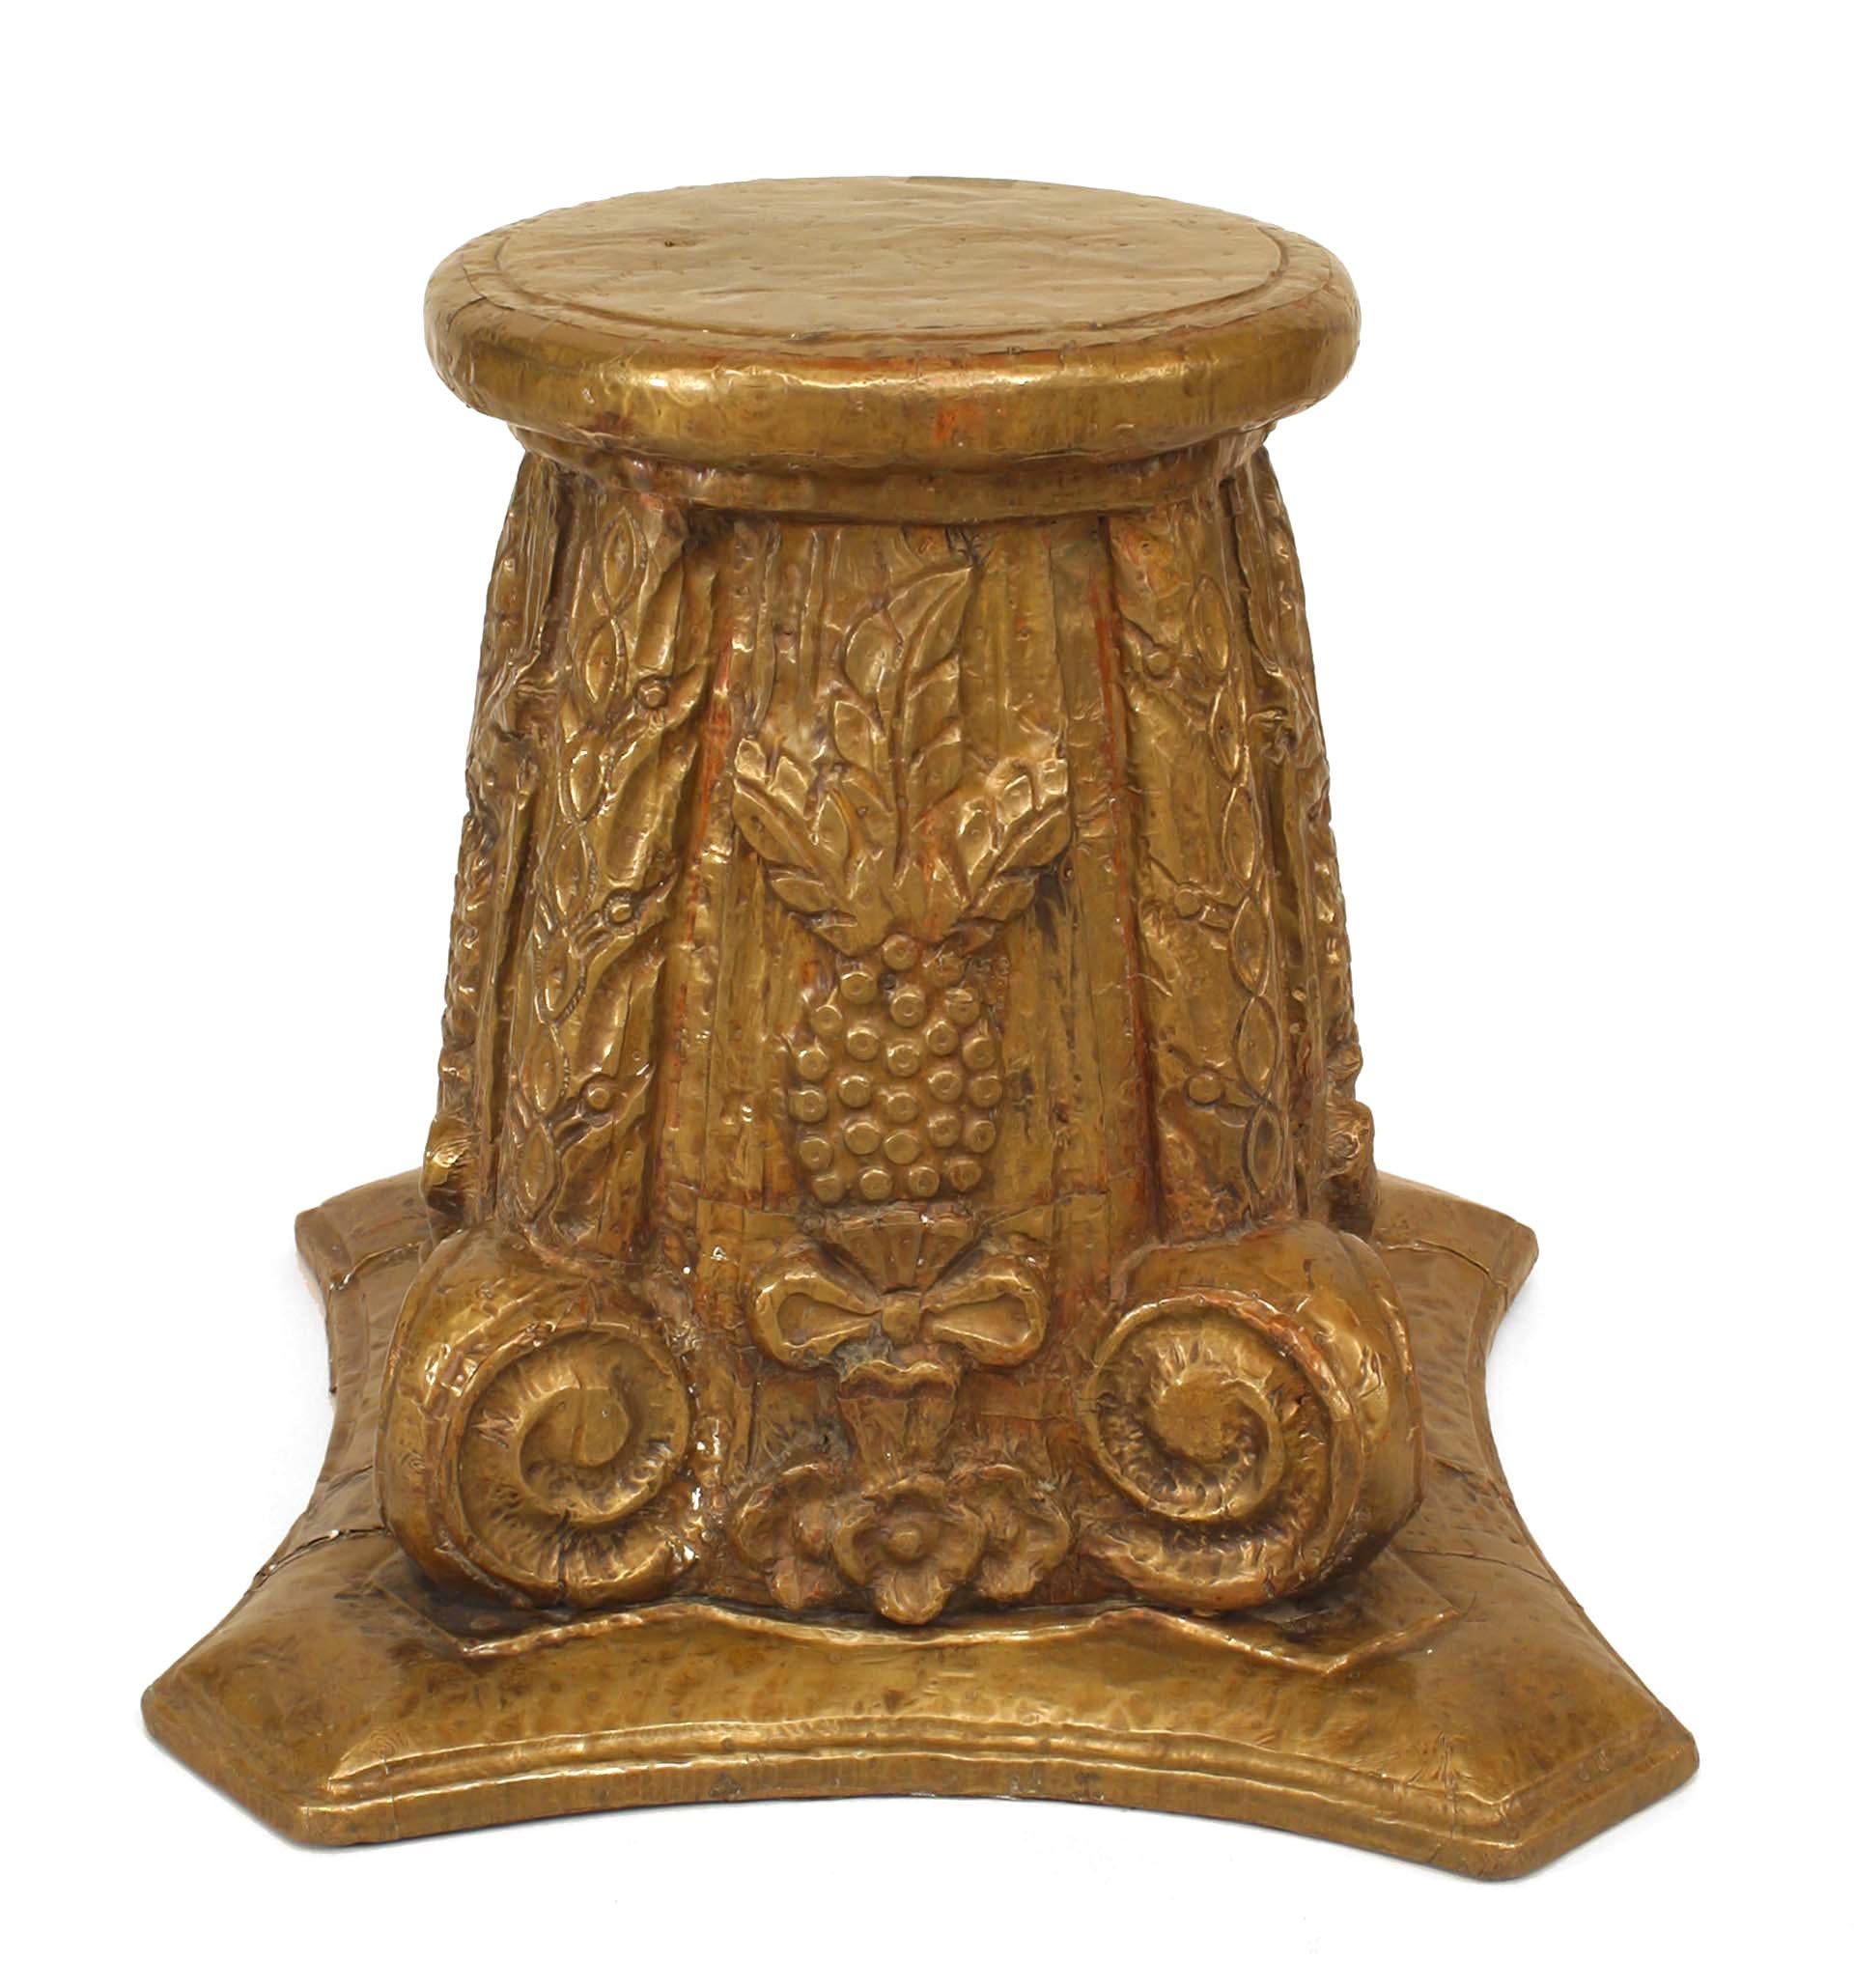 Pair of French Art Deco Corinthian column-form taborets / end table bases in embossed brass over wood with floral and scroll design. (PRICED AS Pair)
